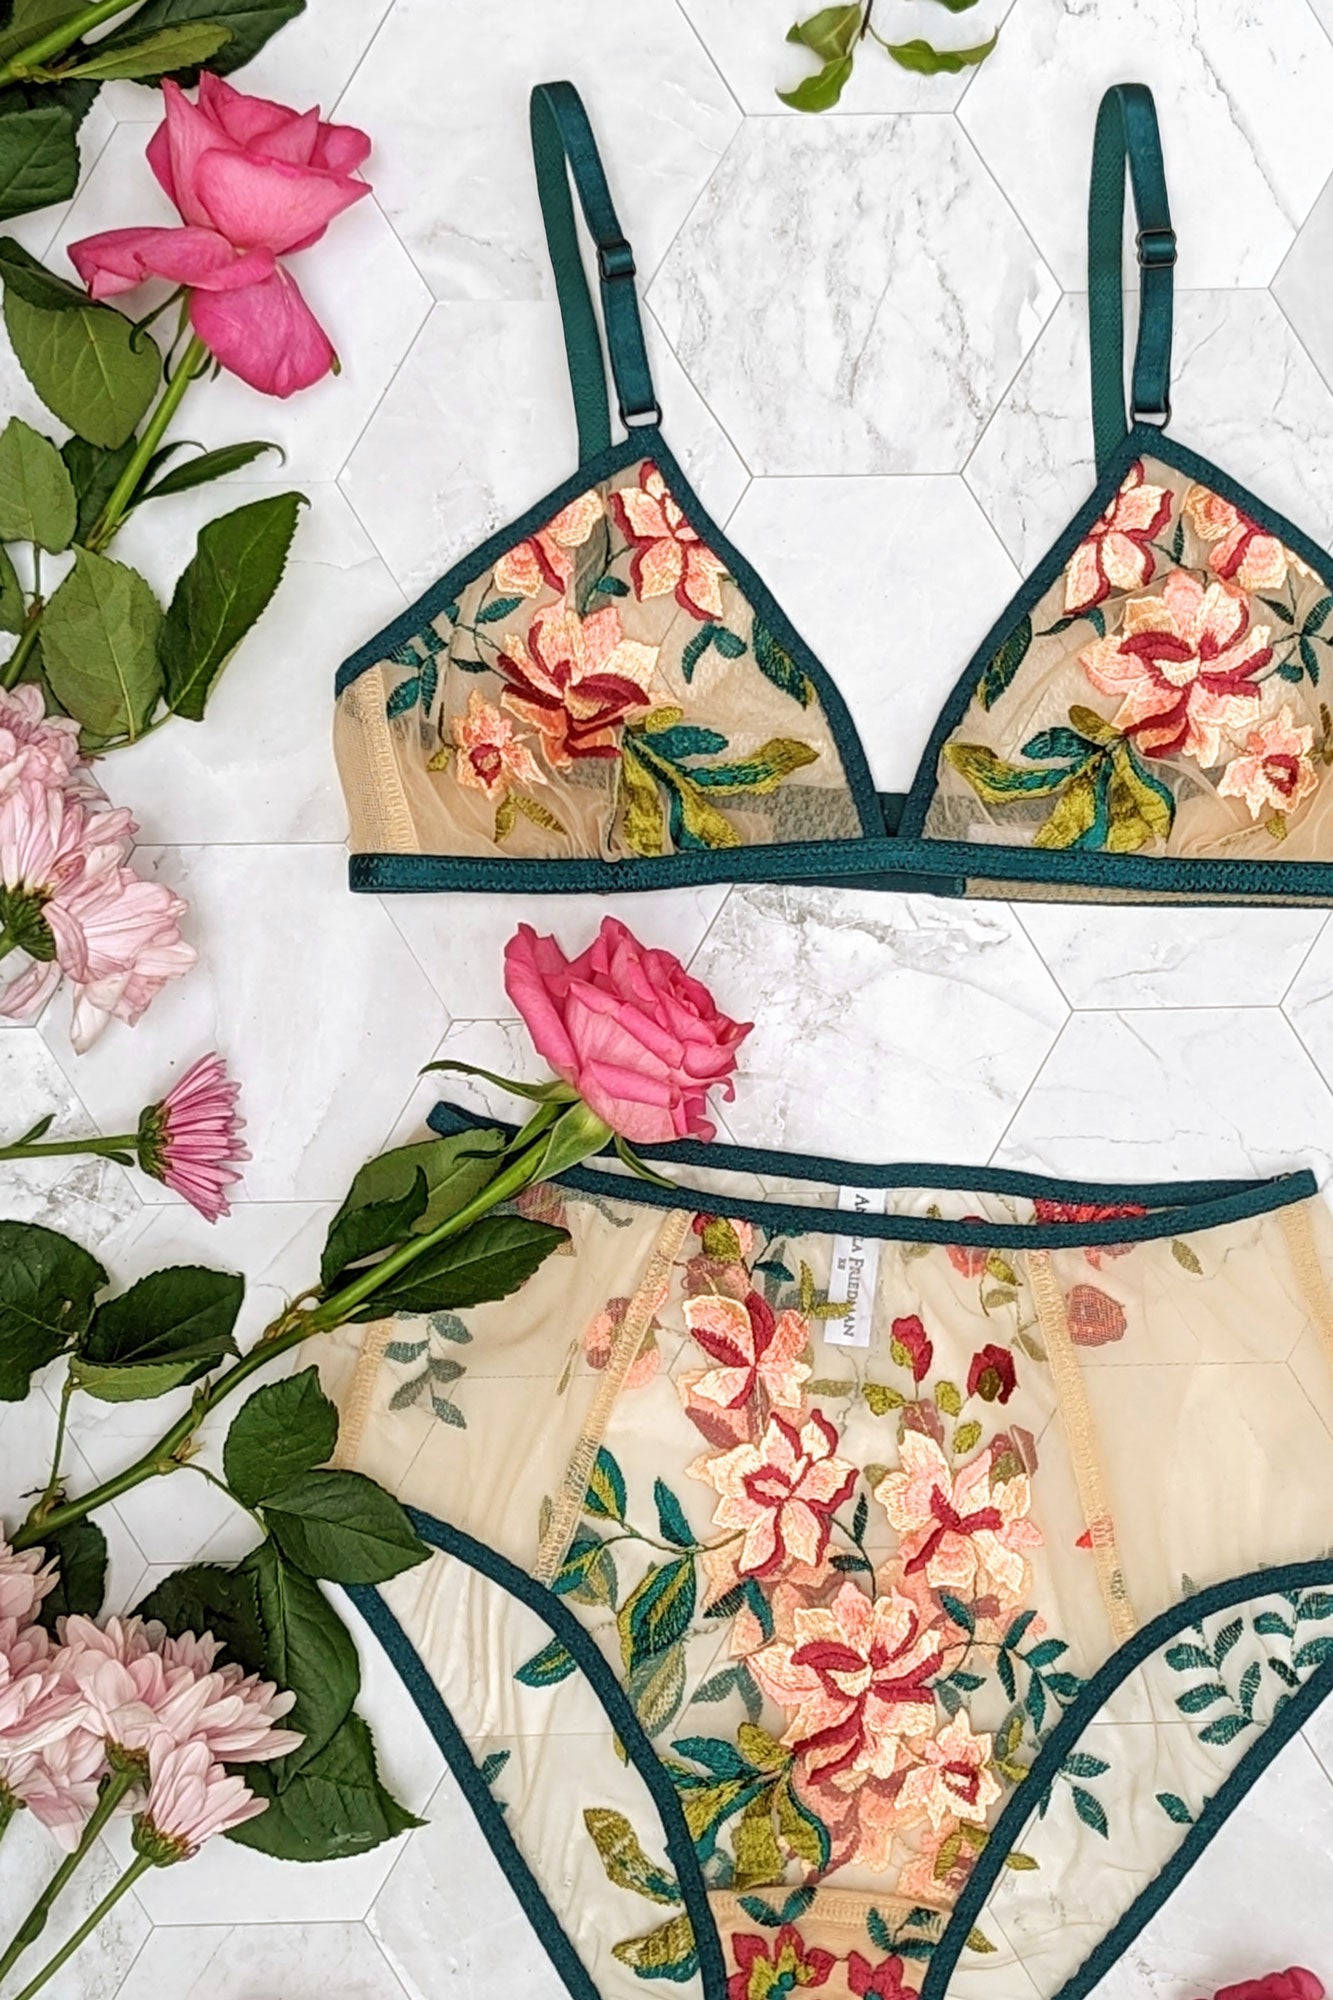 Details of the Camellia bra and briefs set with floral embroidery